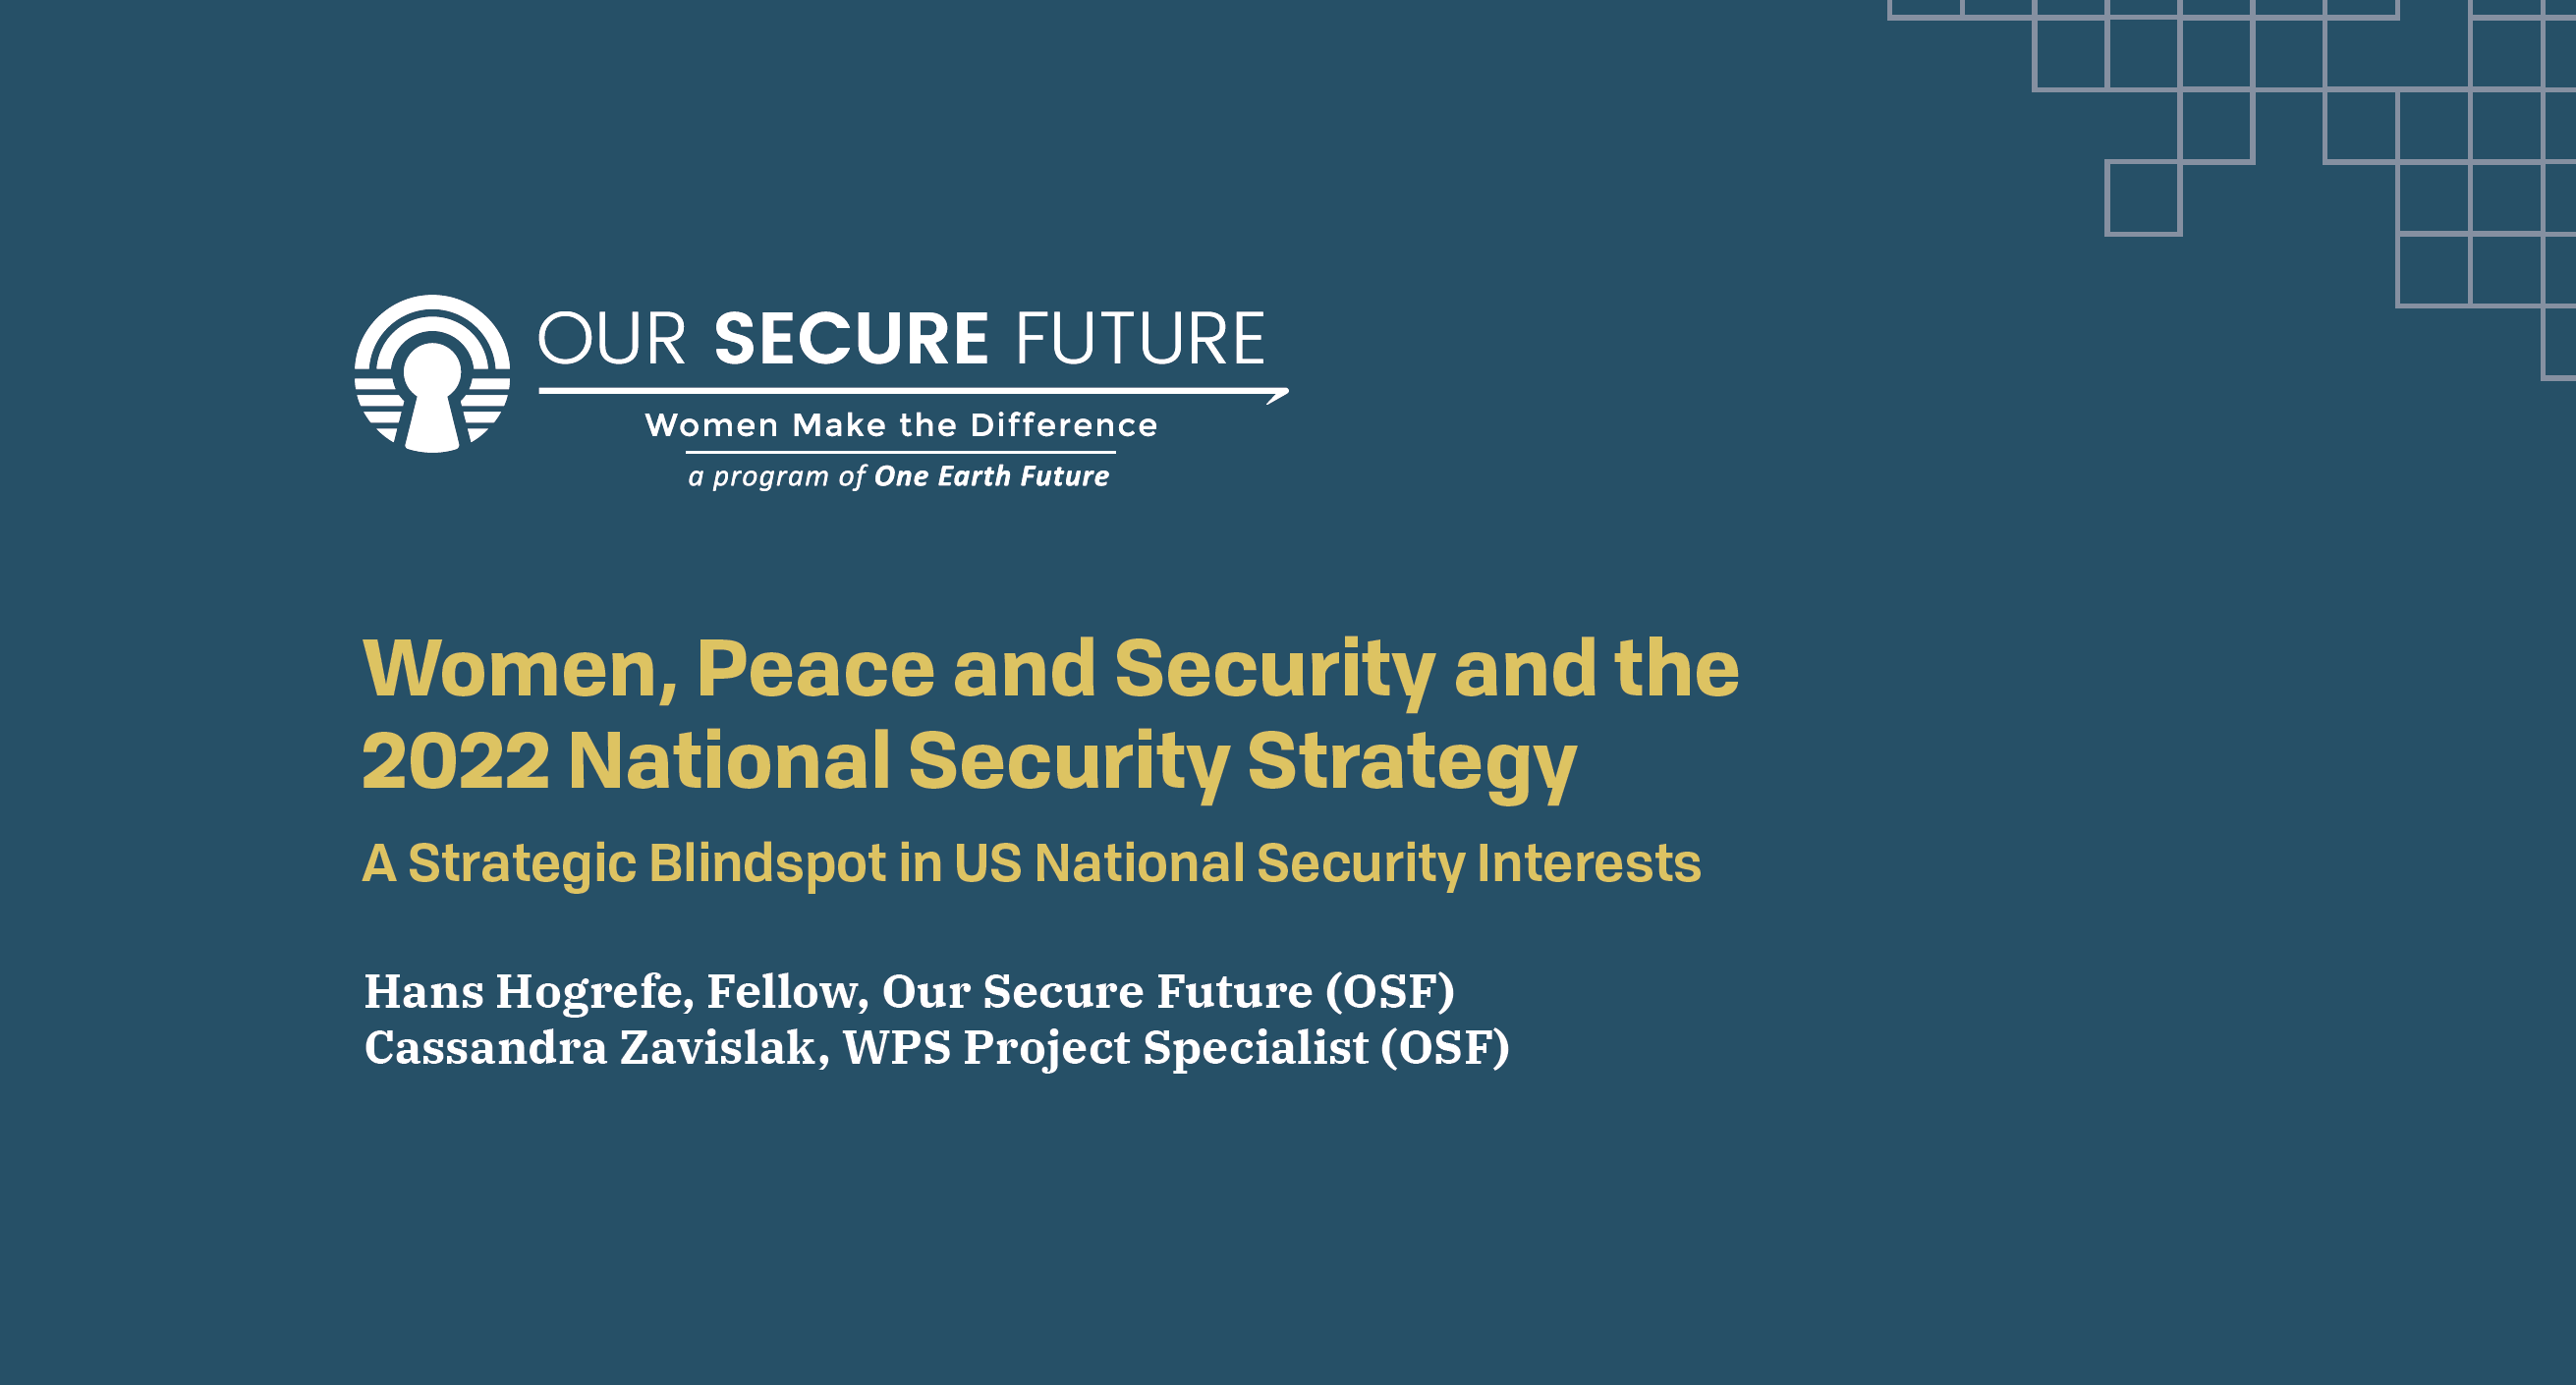 2022 National Security Strategy and WPS